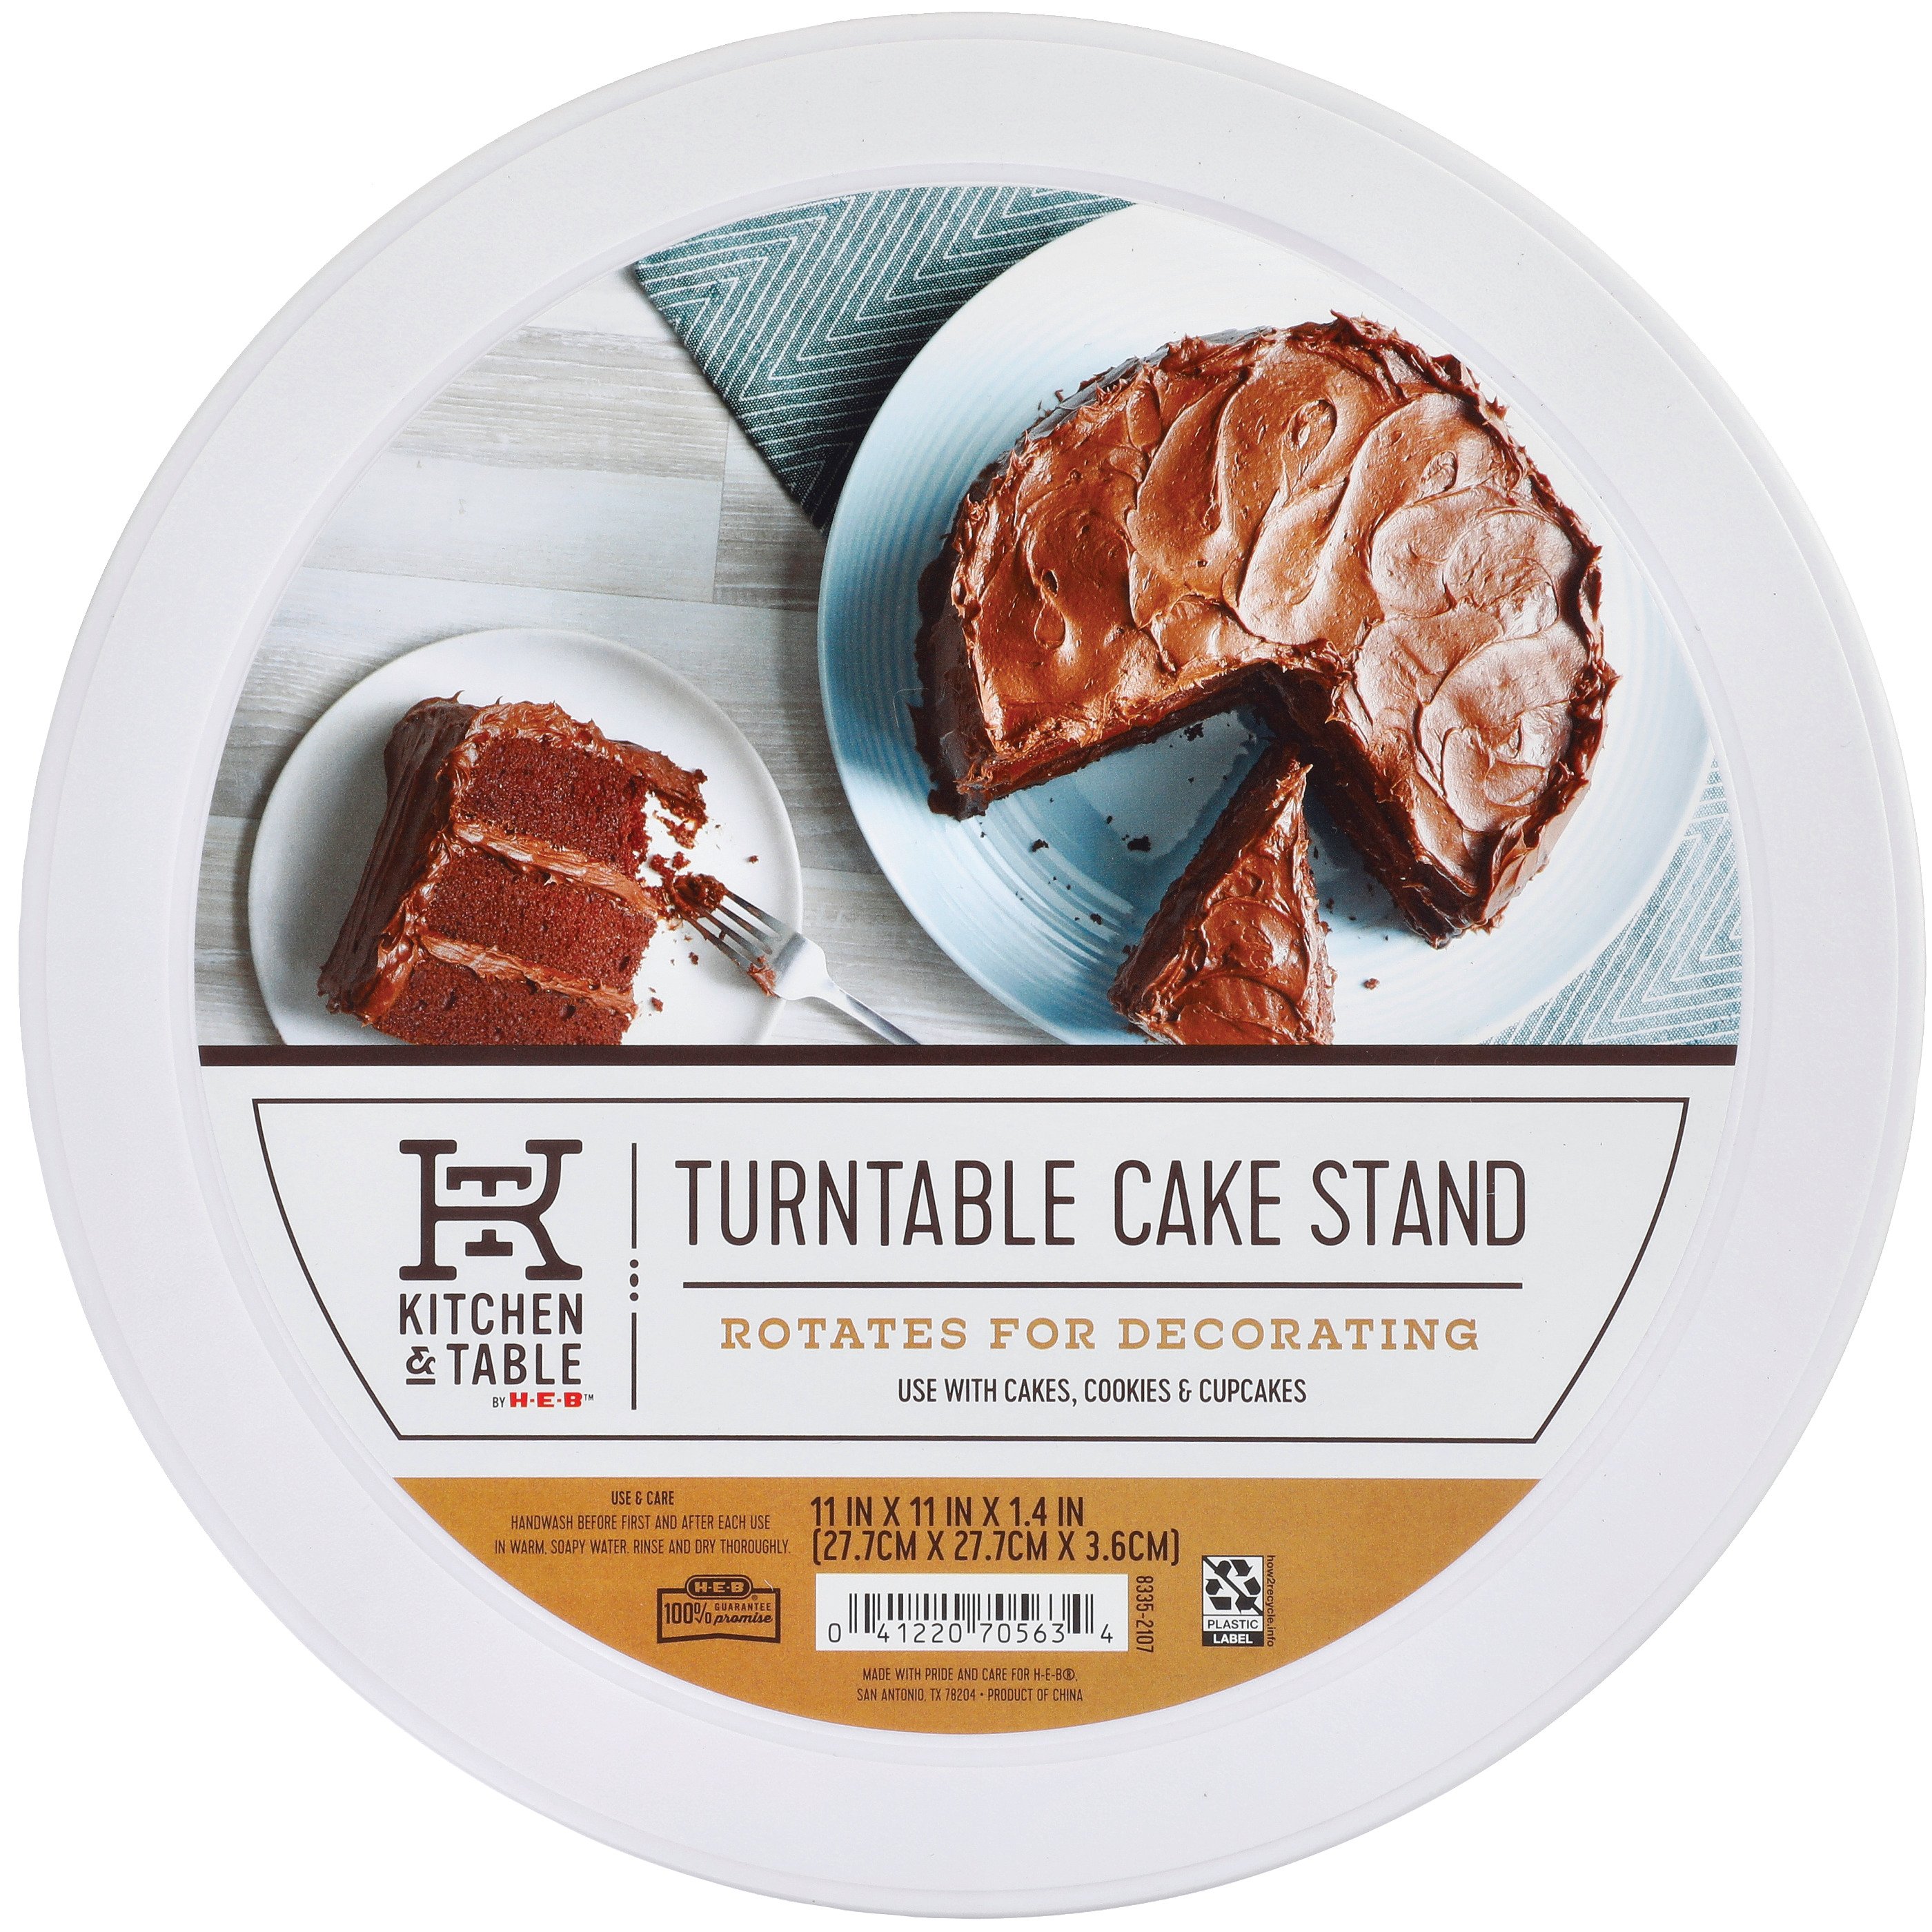 Kitchen & Table by H-E-B Turntable Cake Stand - Shop Pans & Dishes at H-E-B